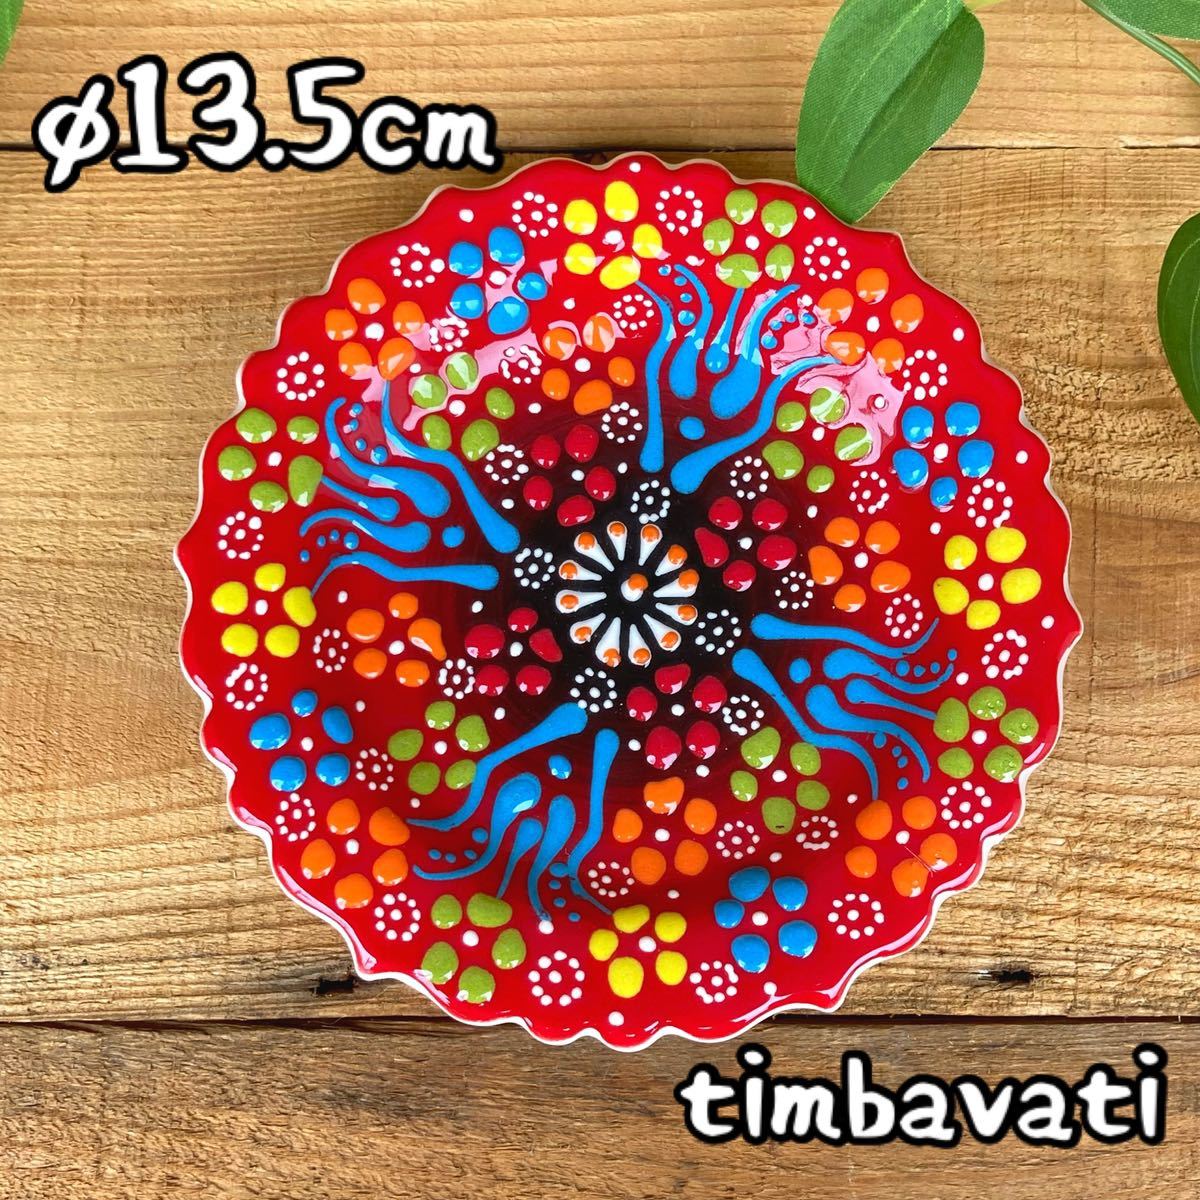 13.5cm☆New☆Turkish Pottery Medium Plate Small Plate Wall Hanging*Red* Handmade Kyutafya Pottery 063, Western tableware, plate, dish, others